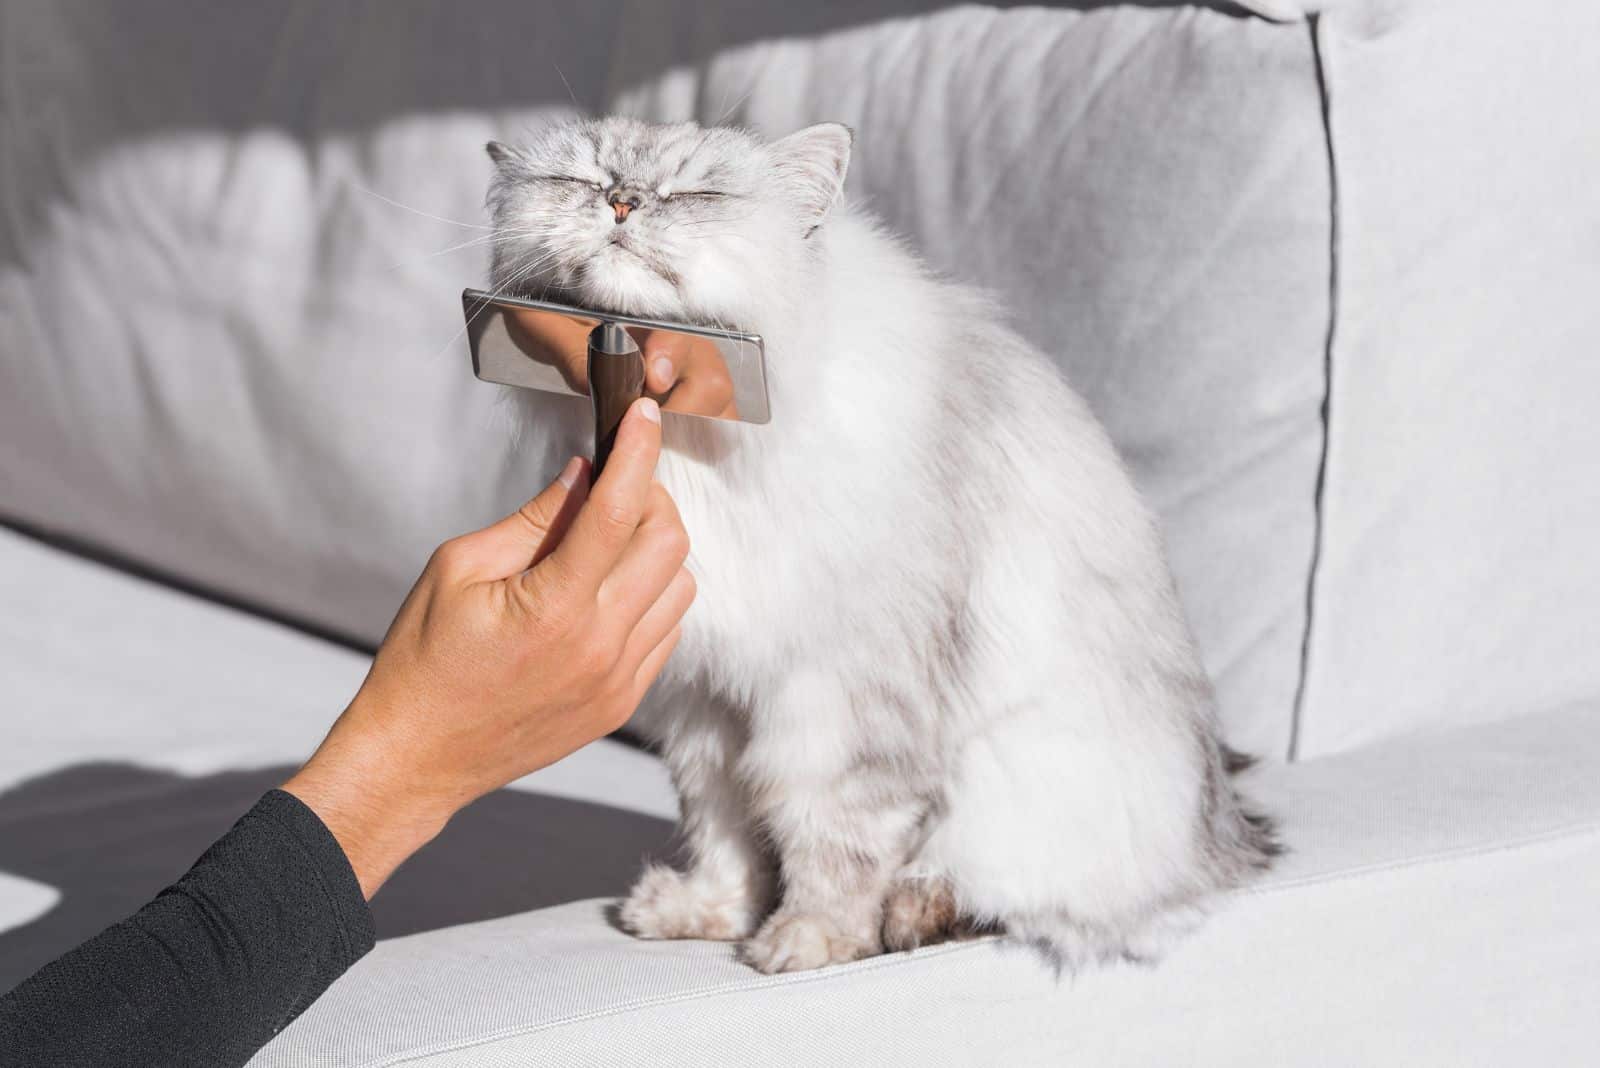 the woman brushes the cat on the bed